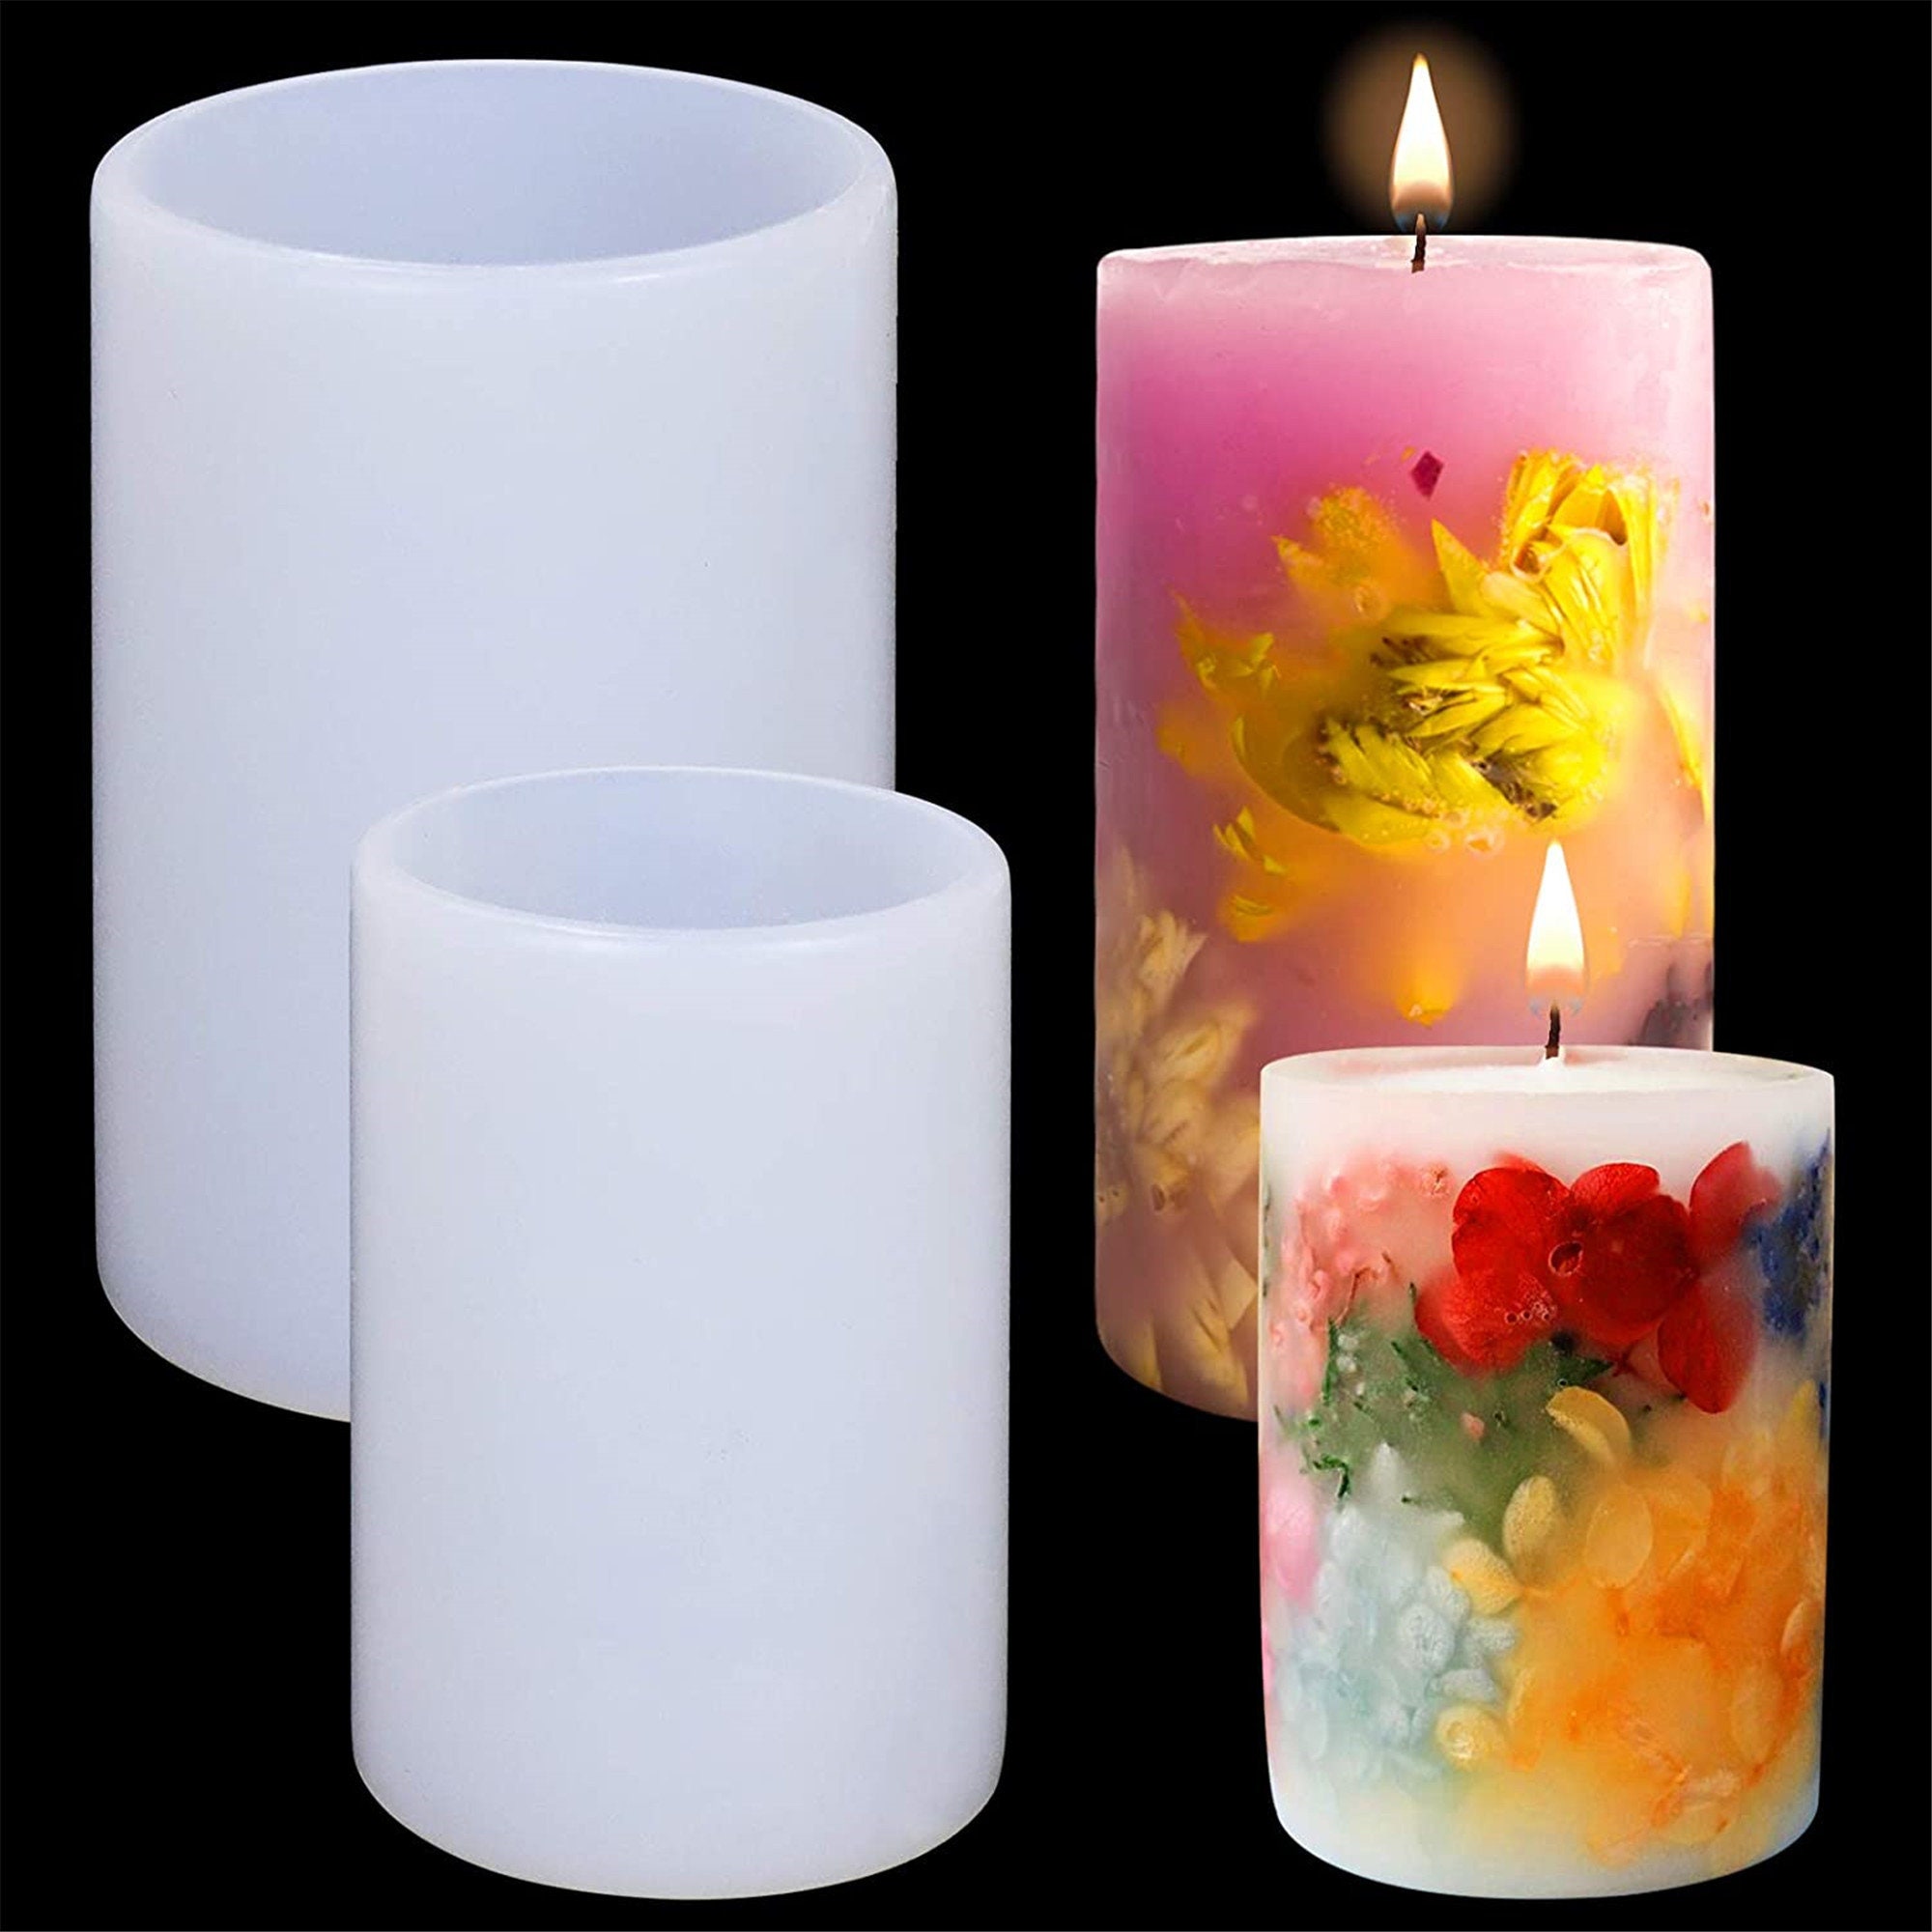 DIY Aromatherapy Wax Silicone Mold Super Popular Personalized Gifts Flower  Ornaments Wax Mold Soap Candle Mold DIY Clay Crafts From Yiyu_hg, $13.77